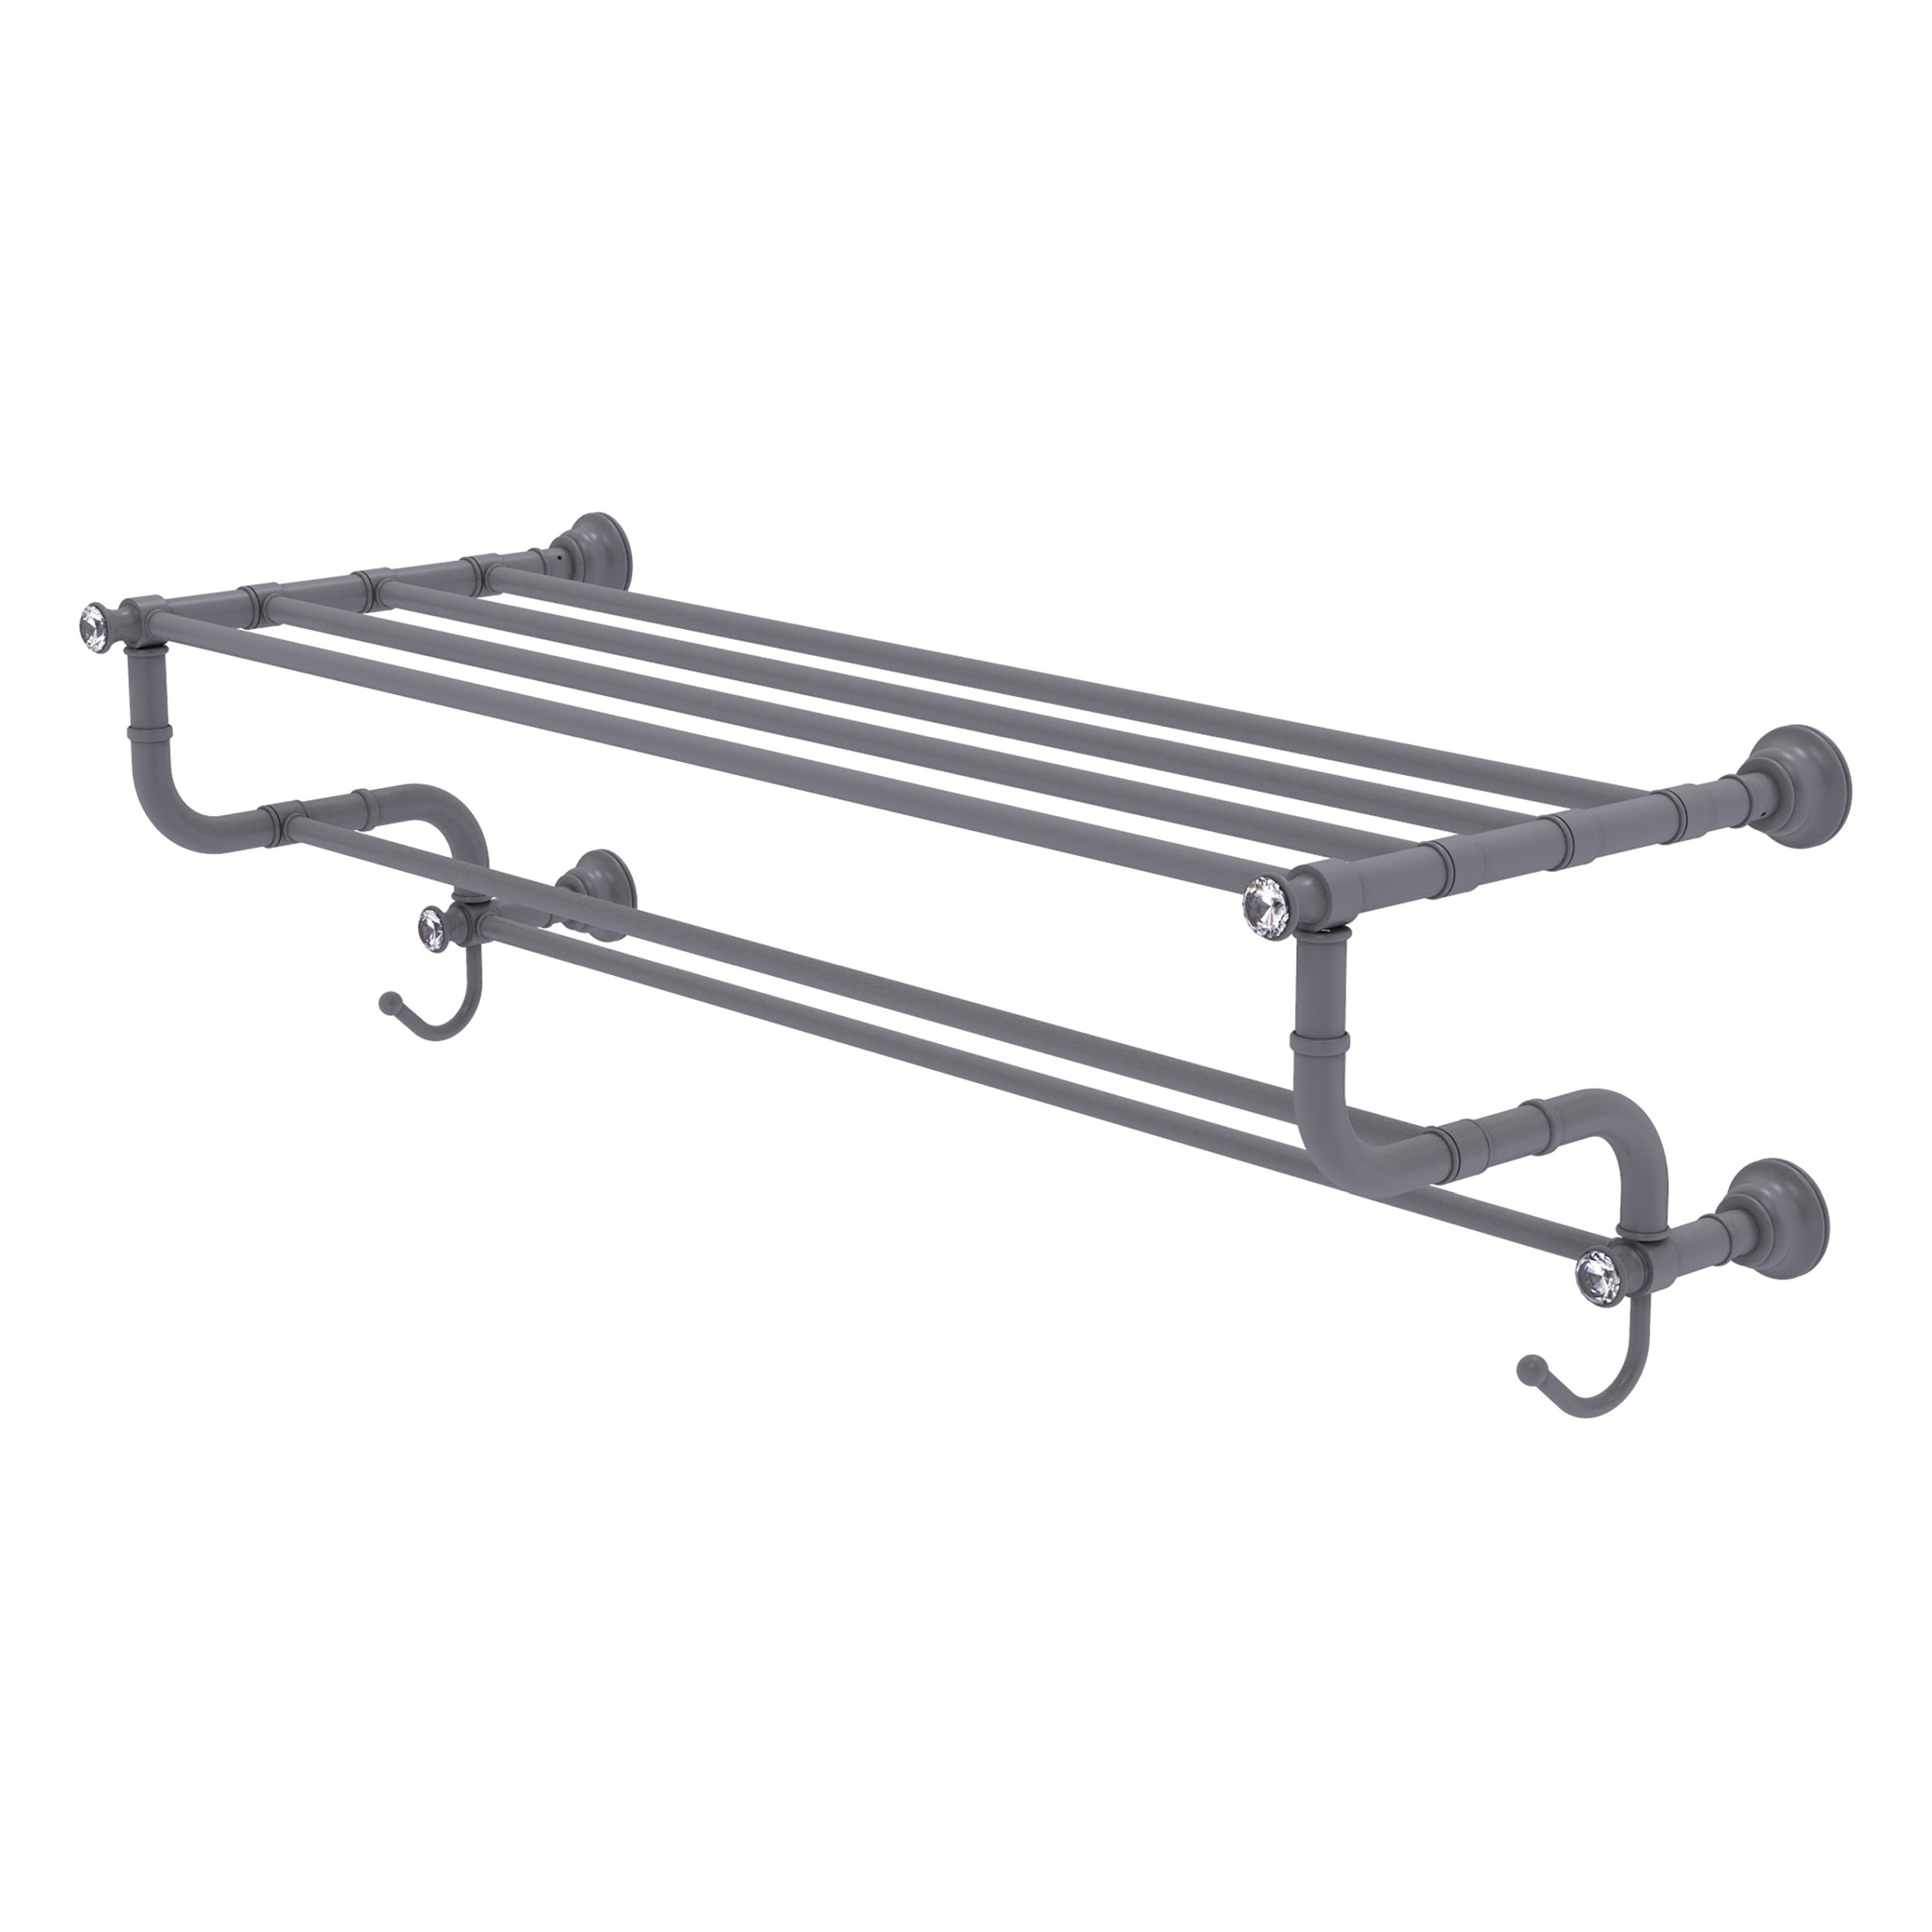 Carolina Crystal Collection 36-in Towel Shelf with Double Towel Bar in Matte Gray - image 1 of 1